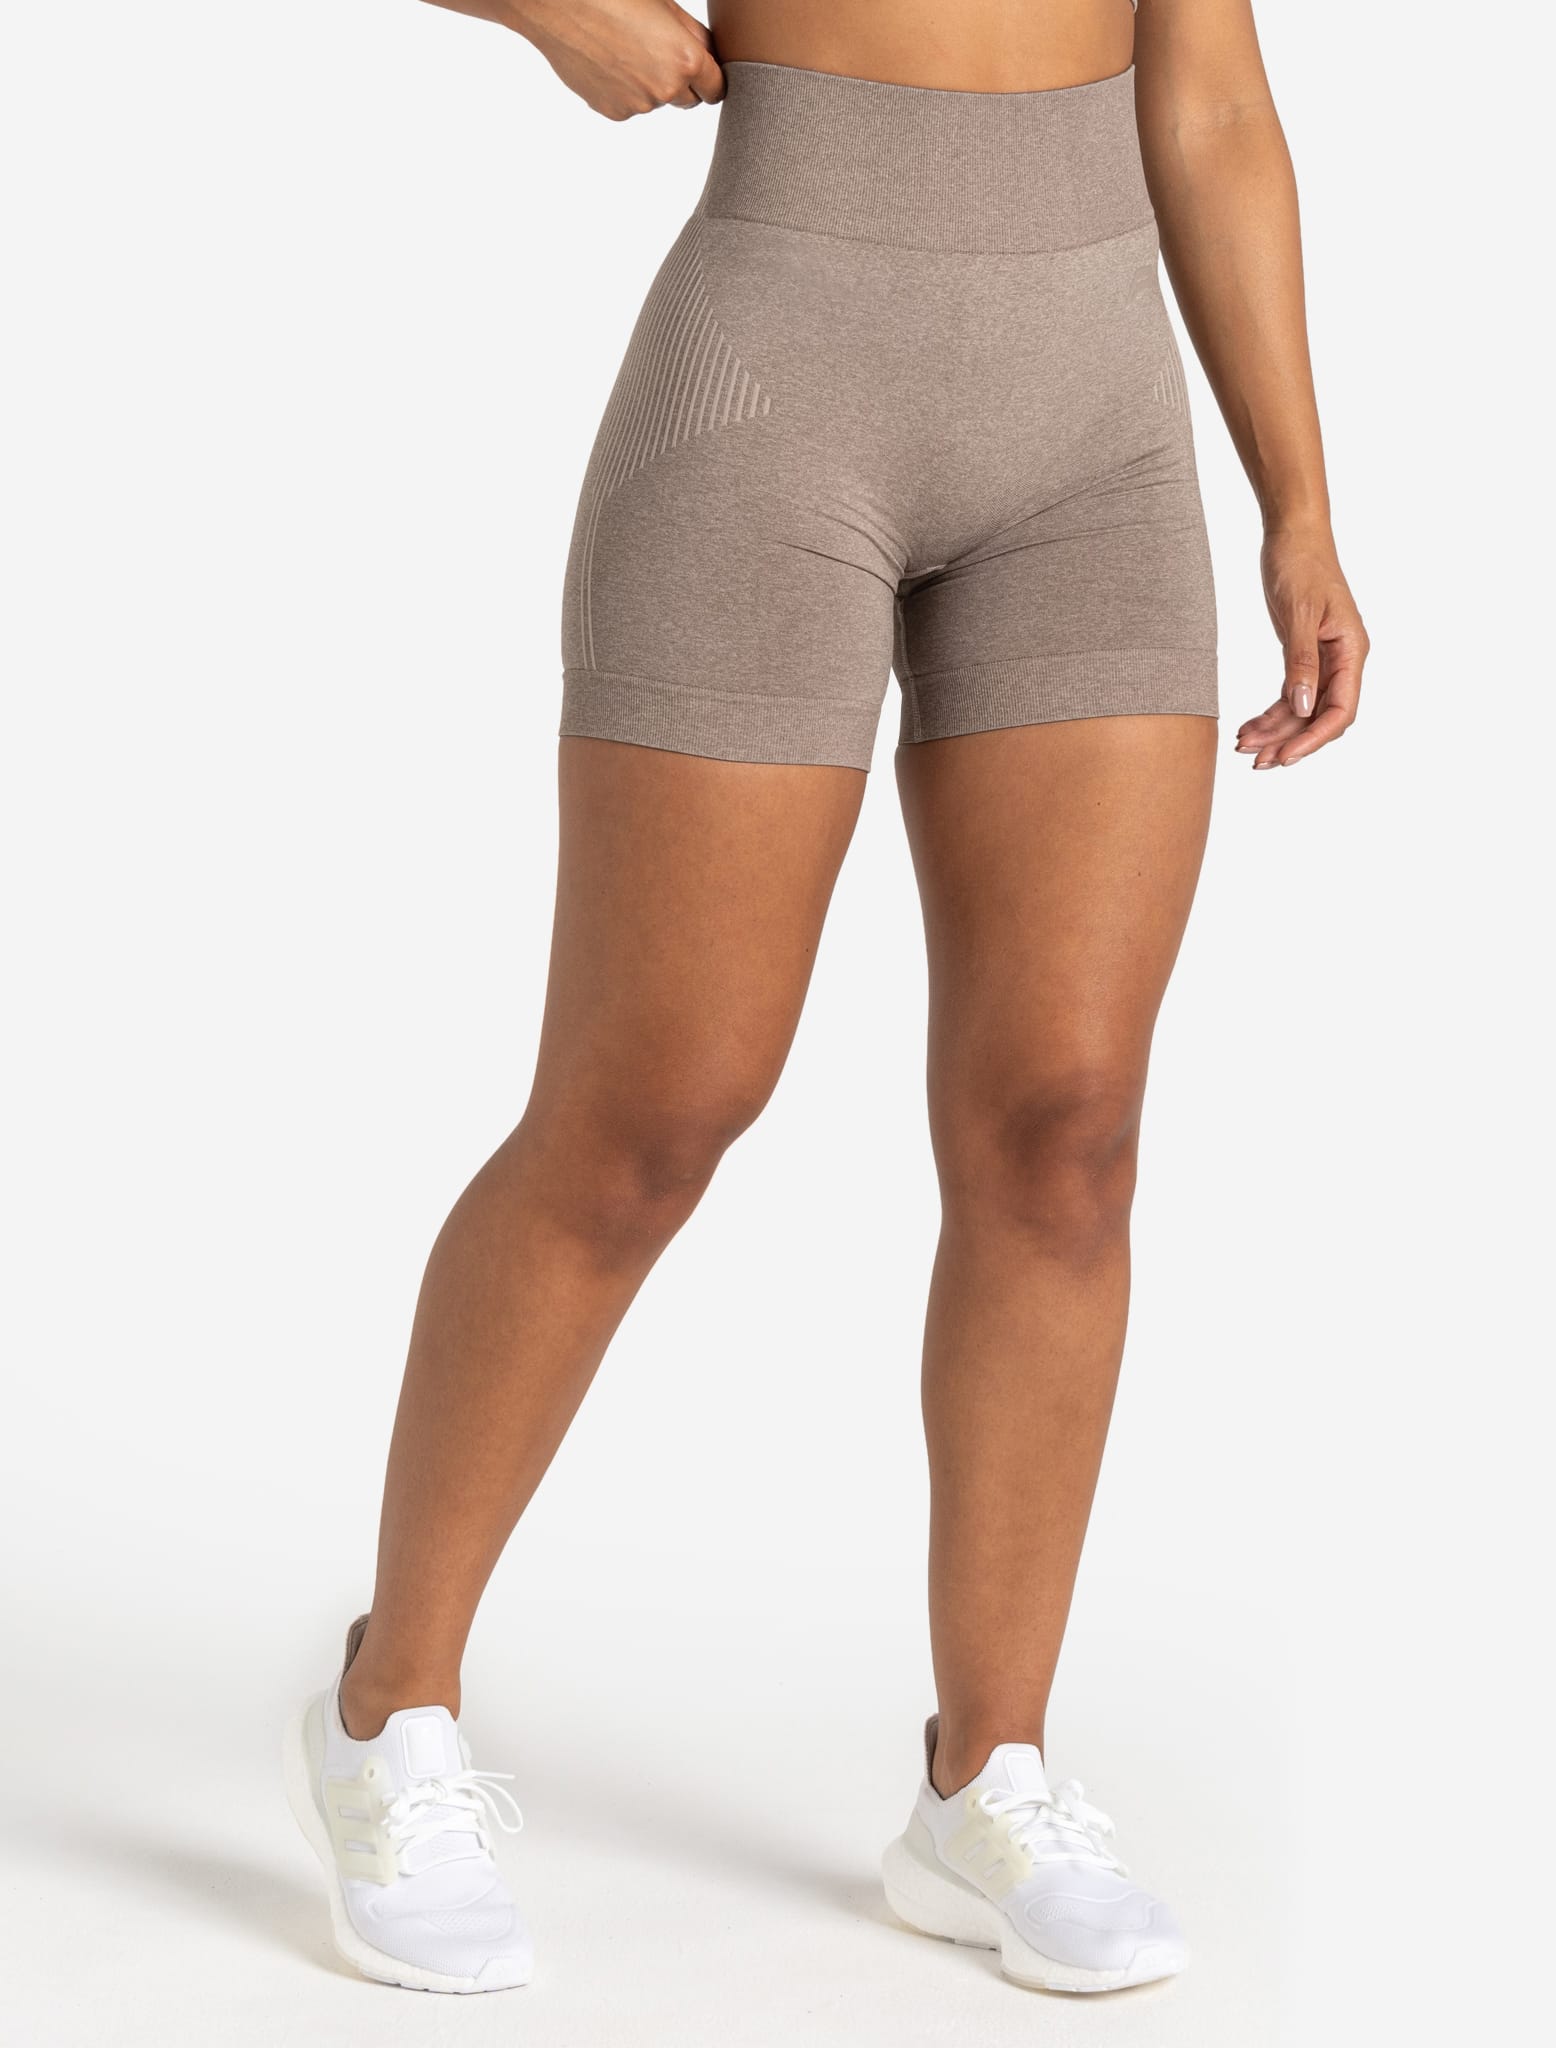 ADAPT 2.0 Seamless Shorts - Fawn Pursue Fitness 2